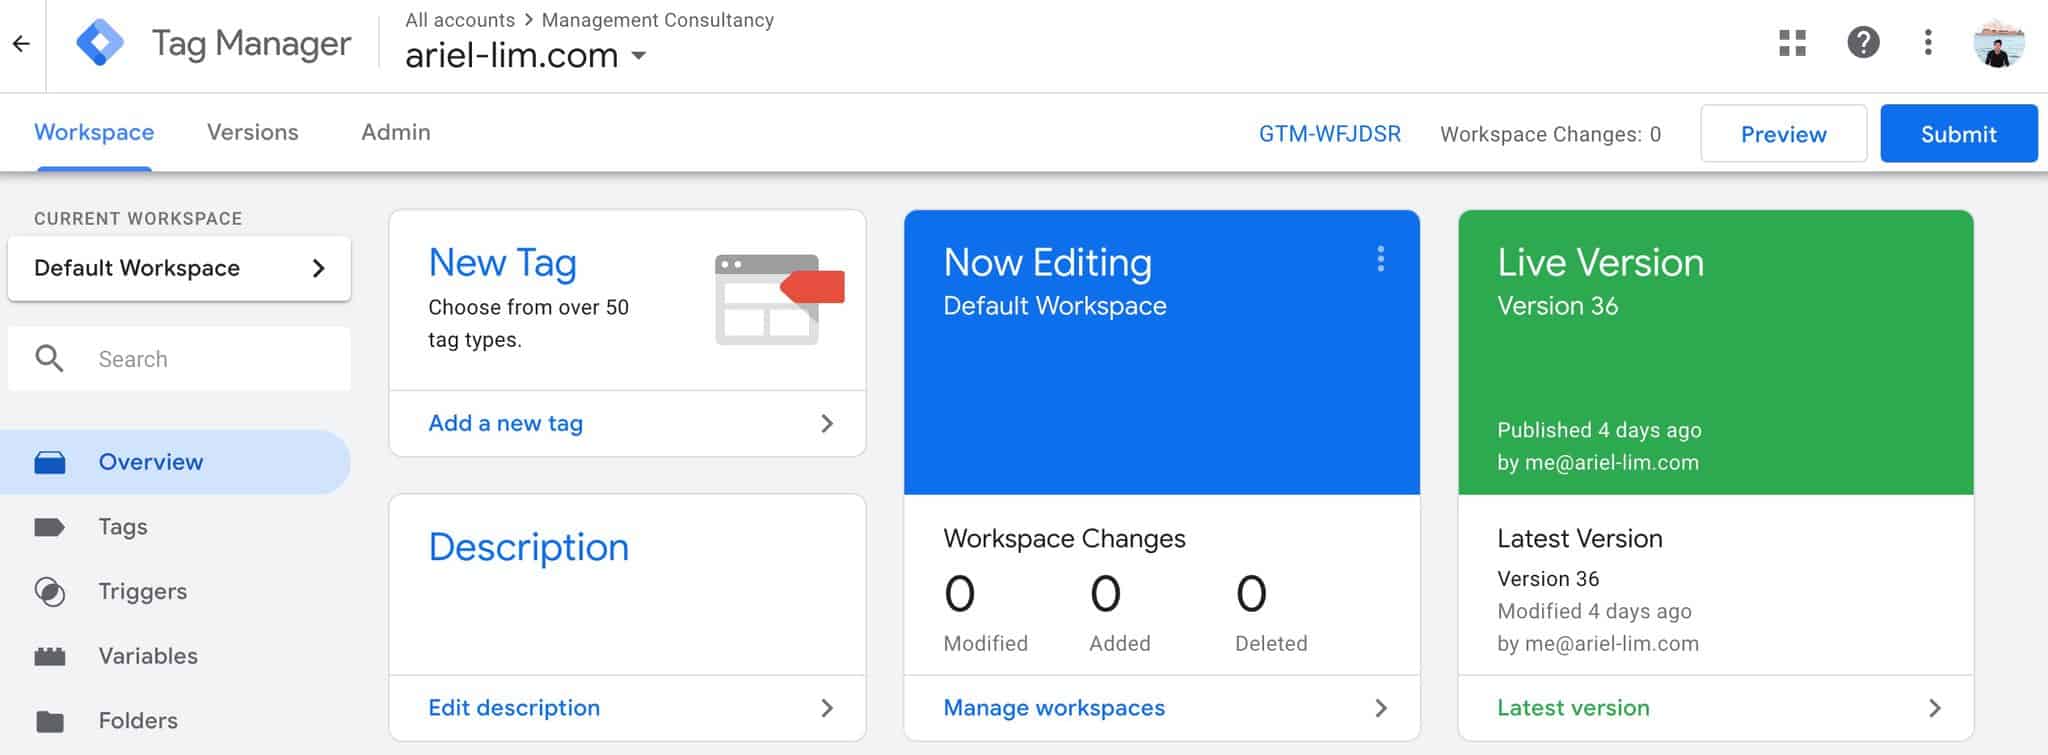 Google Tag Manager overview dashboard